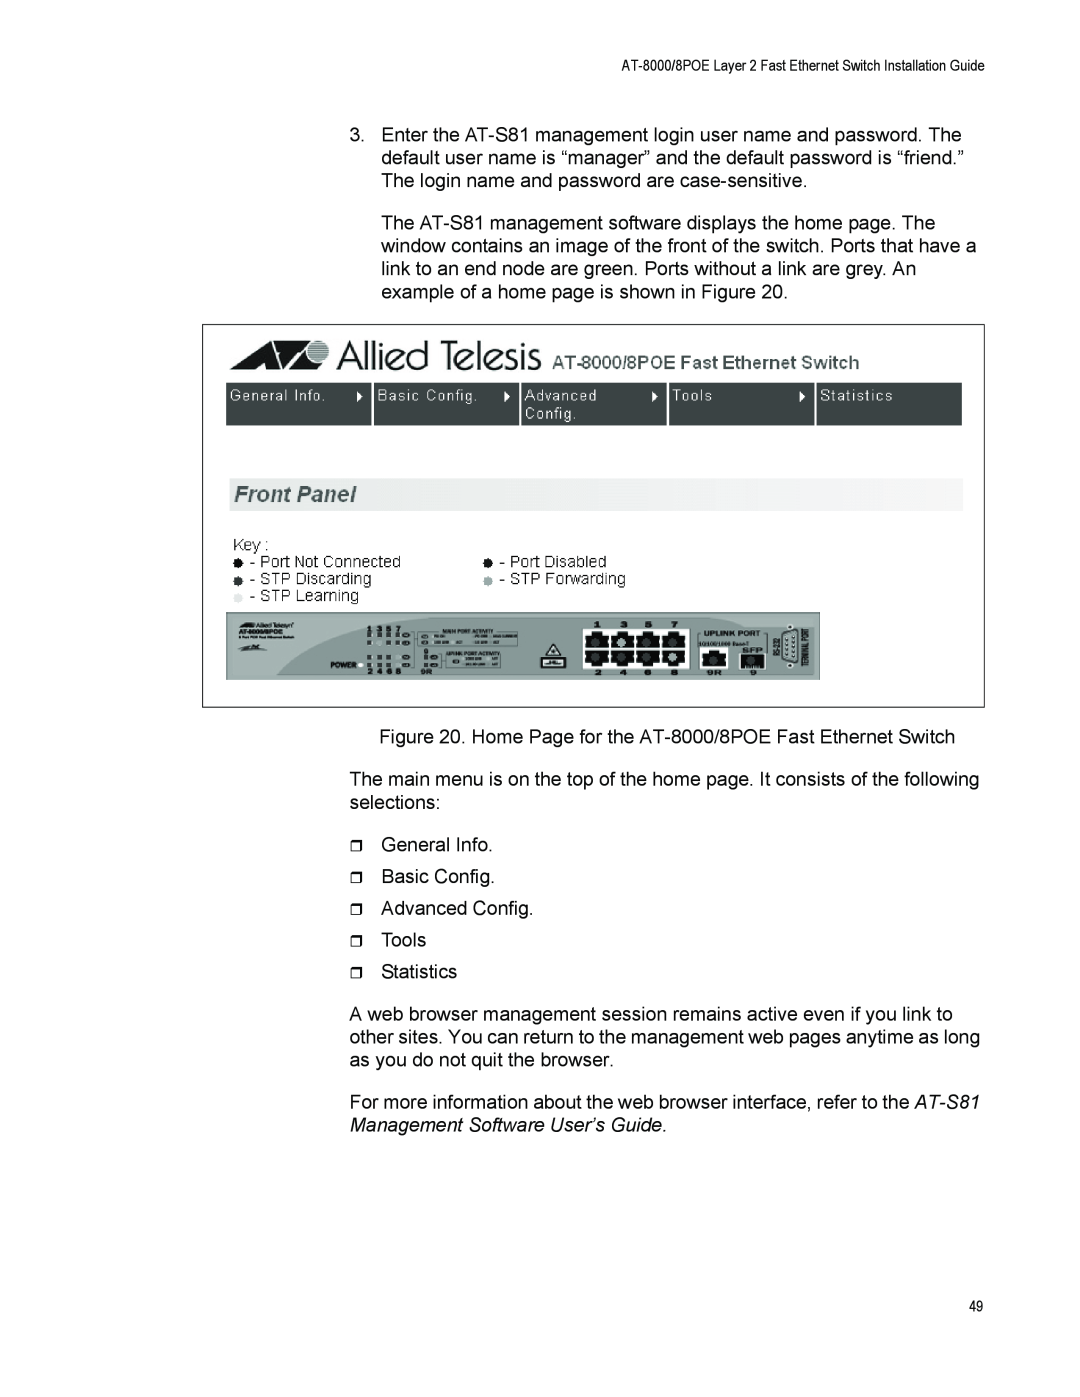 Allied Telesis manual Home Page for the AT-8000/8POE Fast Ethernet Switch 